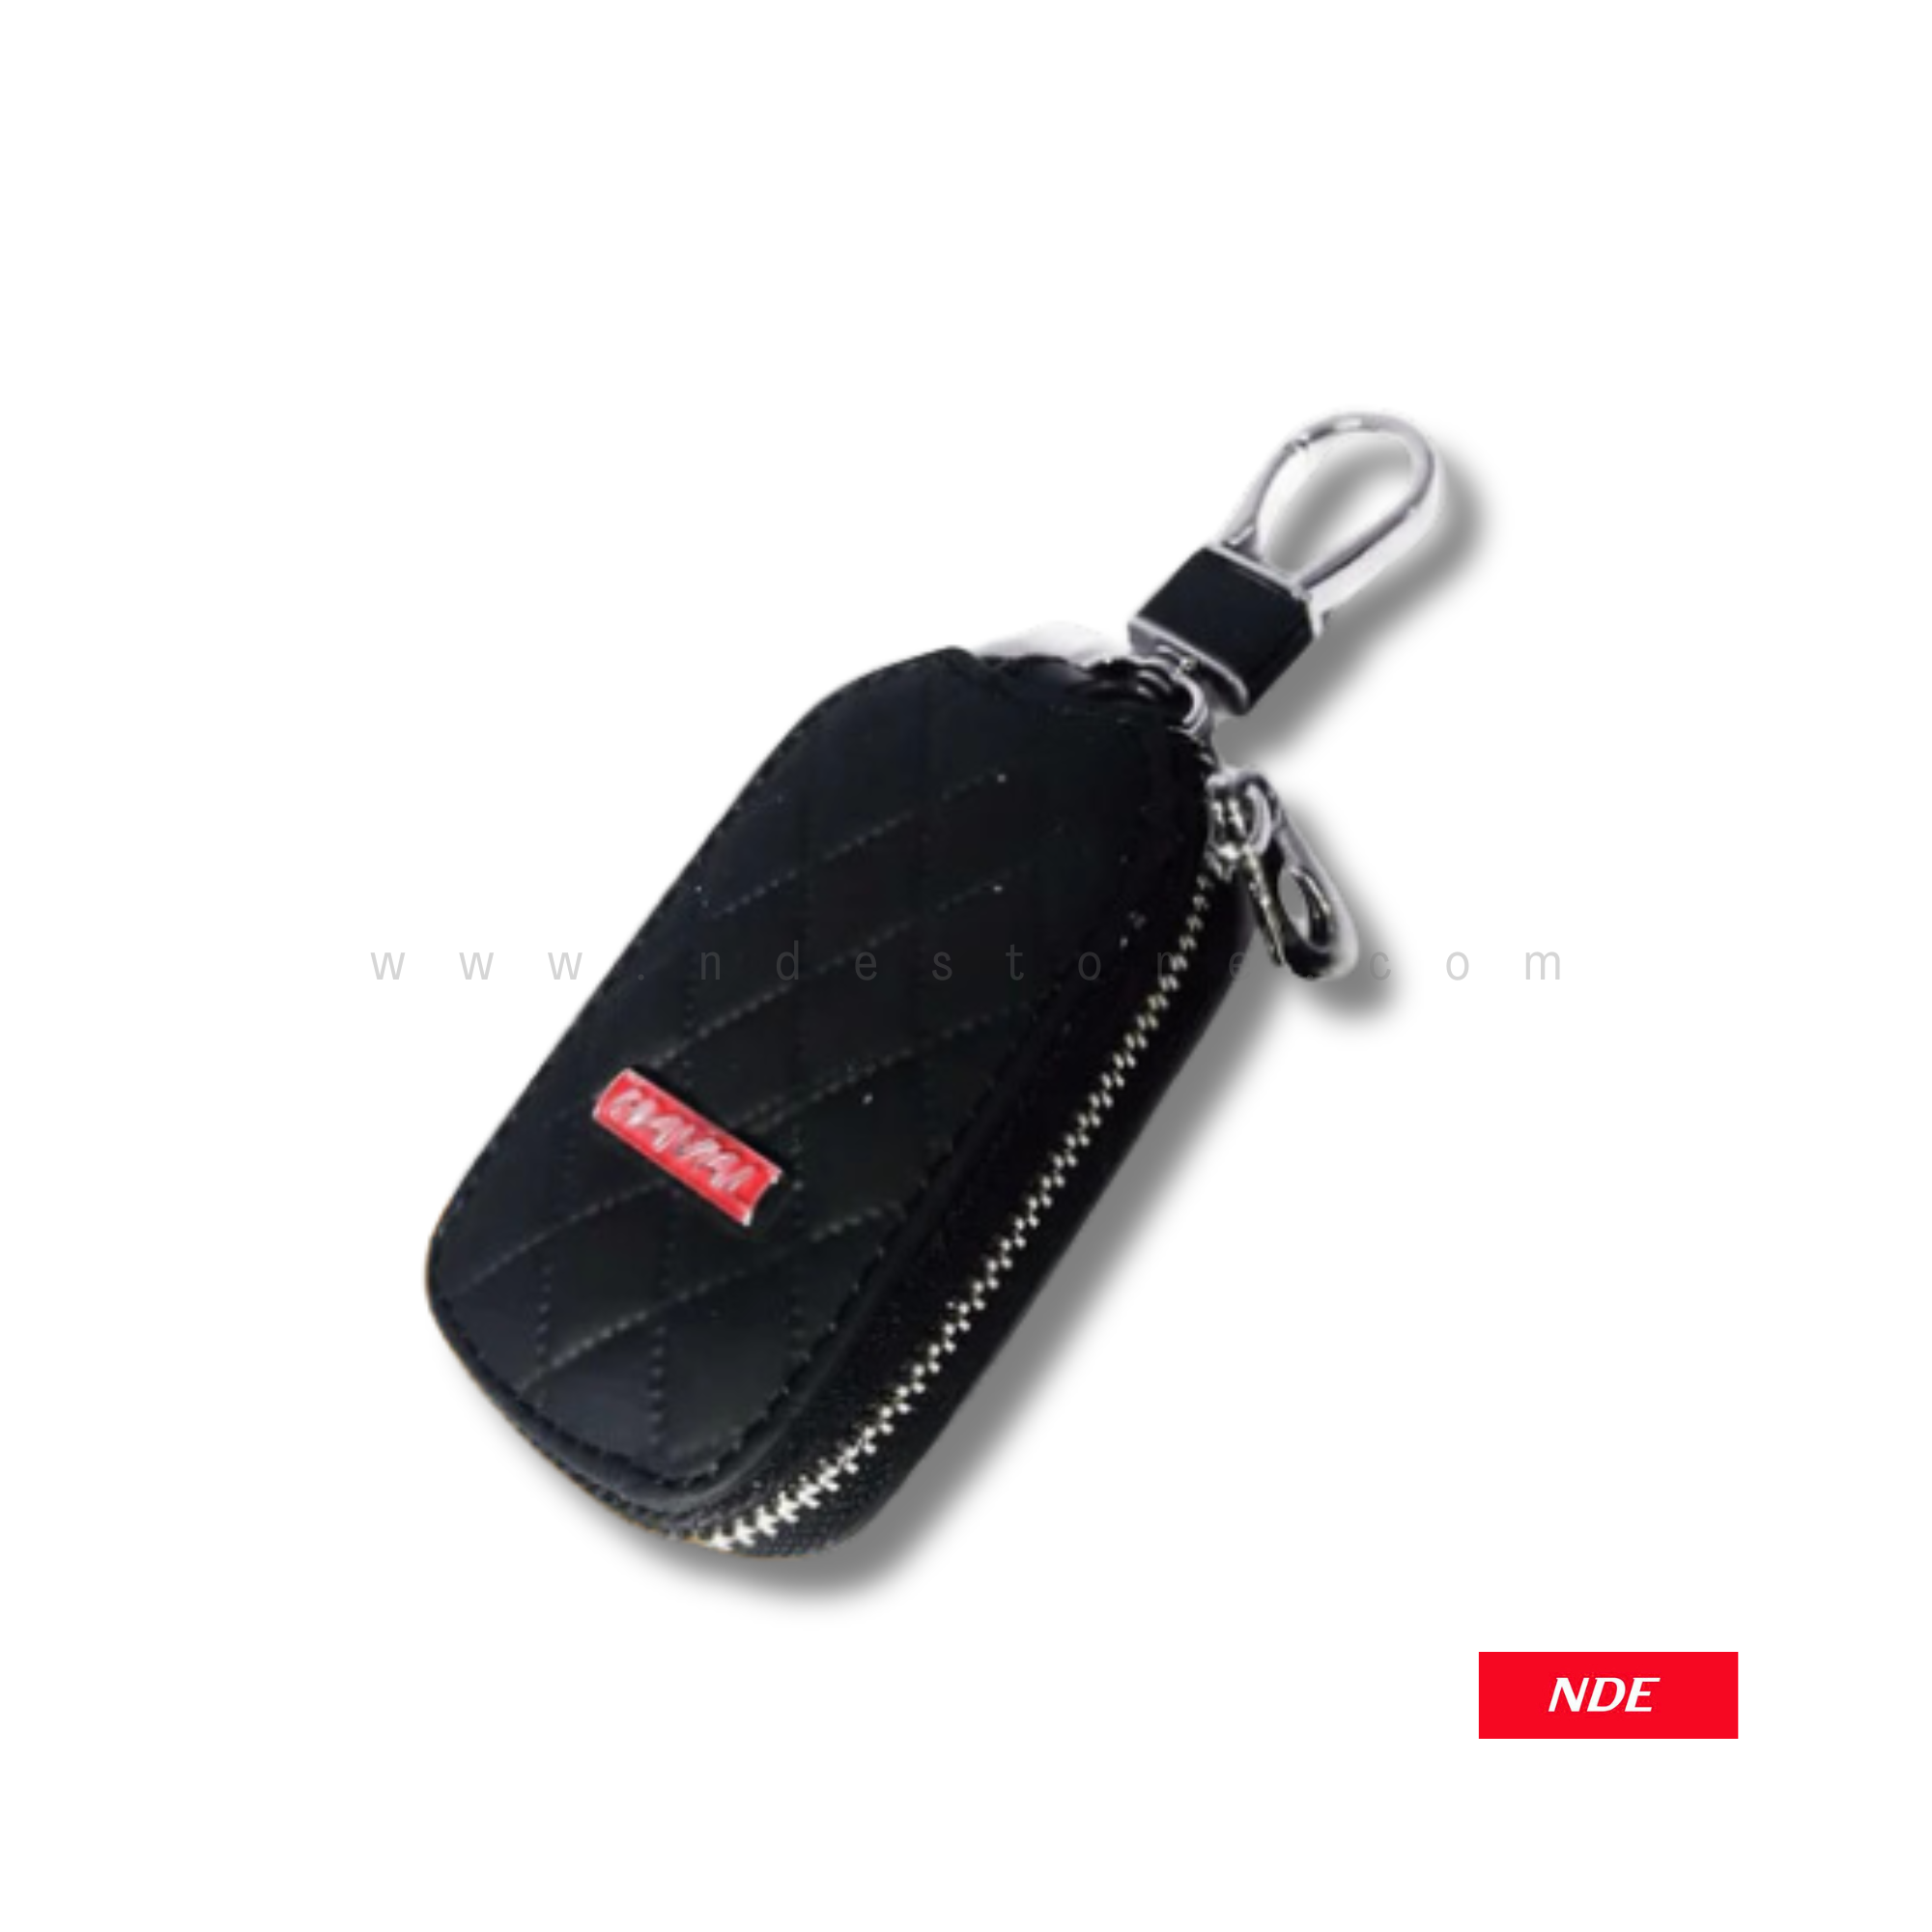 REMOTE COVER KEY POUCH PREMIUM LEATHER MATERIAL WITH HAVAL LOGO (MADE IN CHINA)